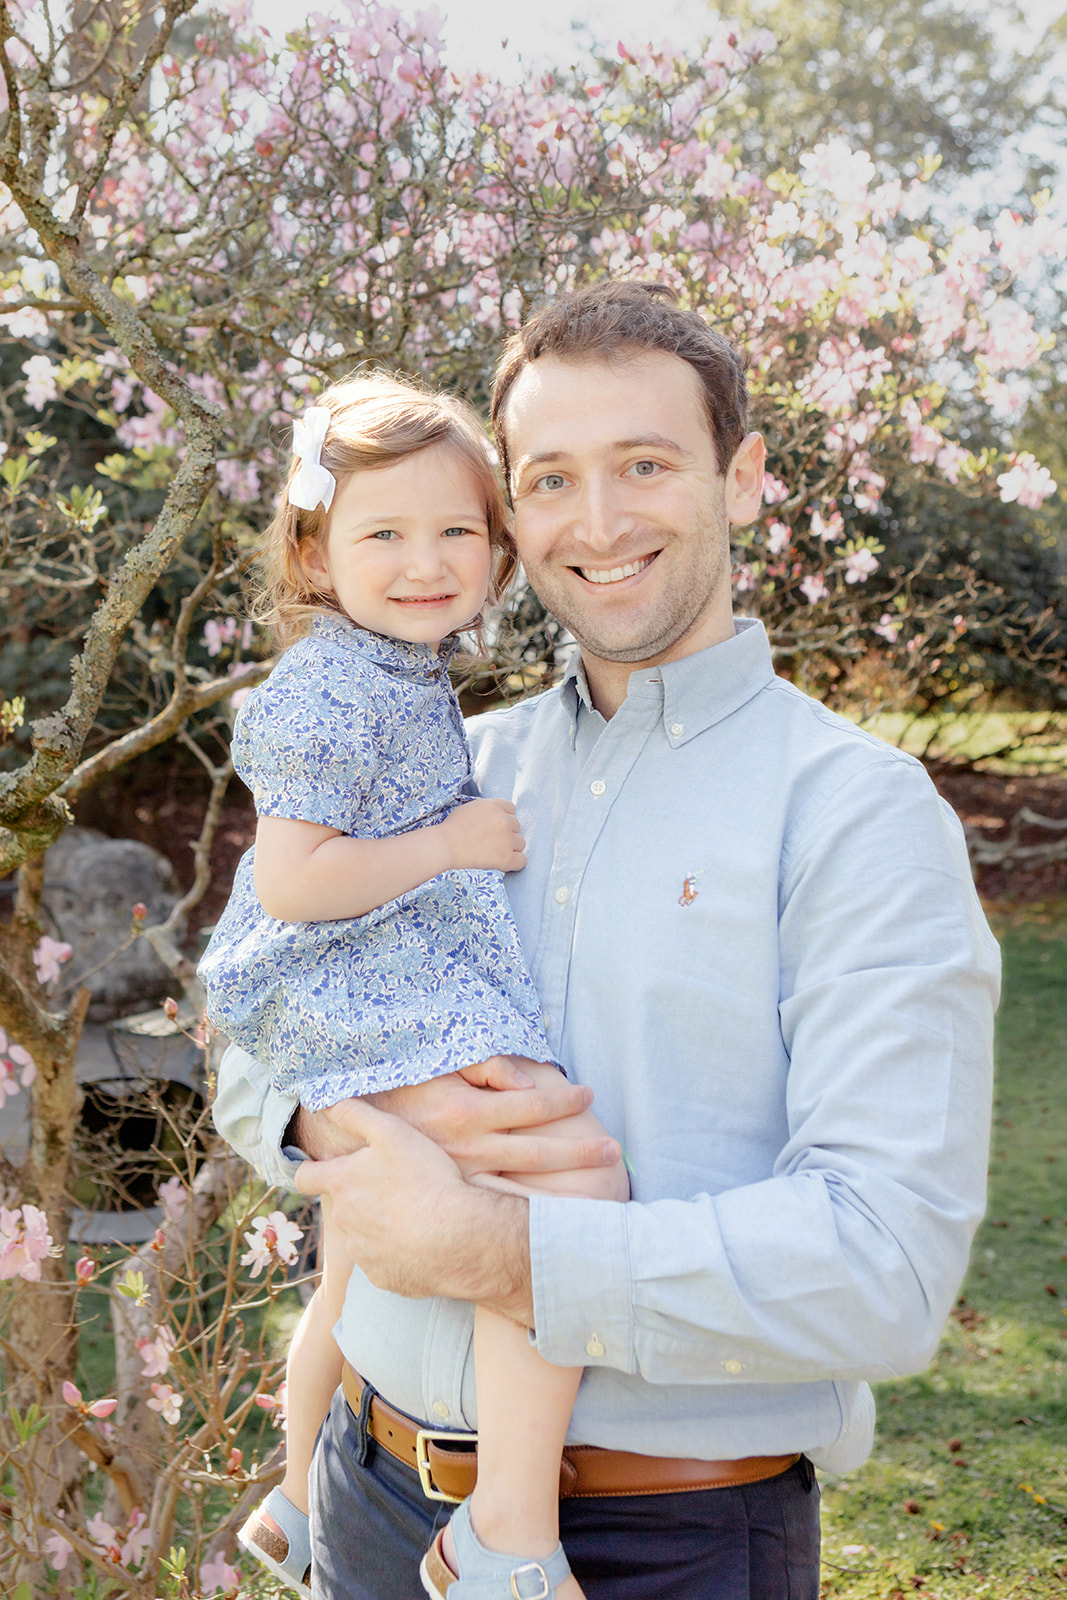 Connecticut dad wearing a classic chambray shirt, holding his little girl who is dressed in a ditsy floral print dress, her hair swept out of her face with a white grosgrain bow; behind the pair a tree blooms with delicate pink flowers